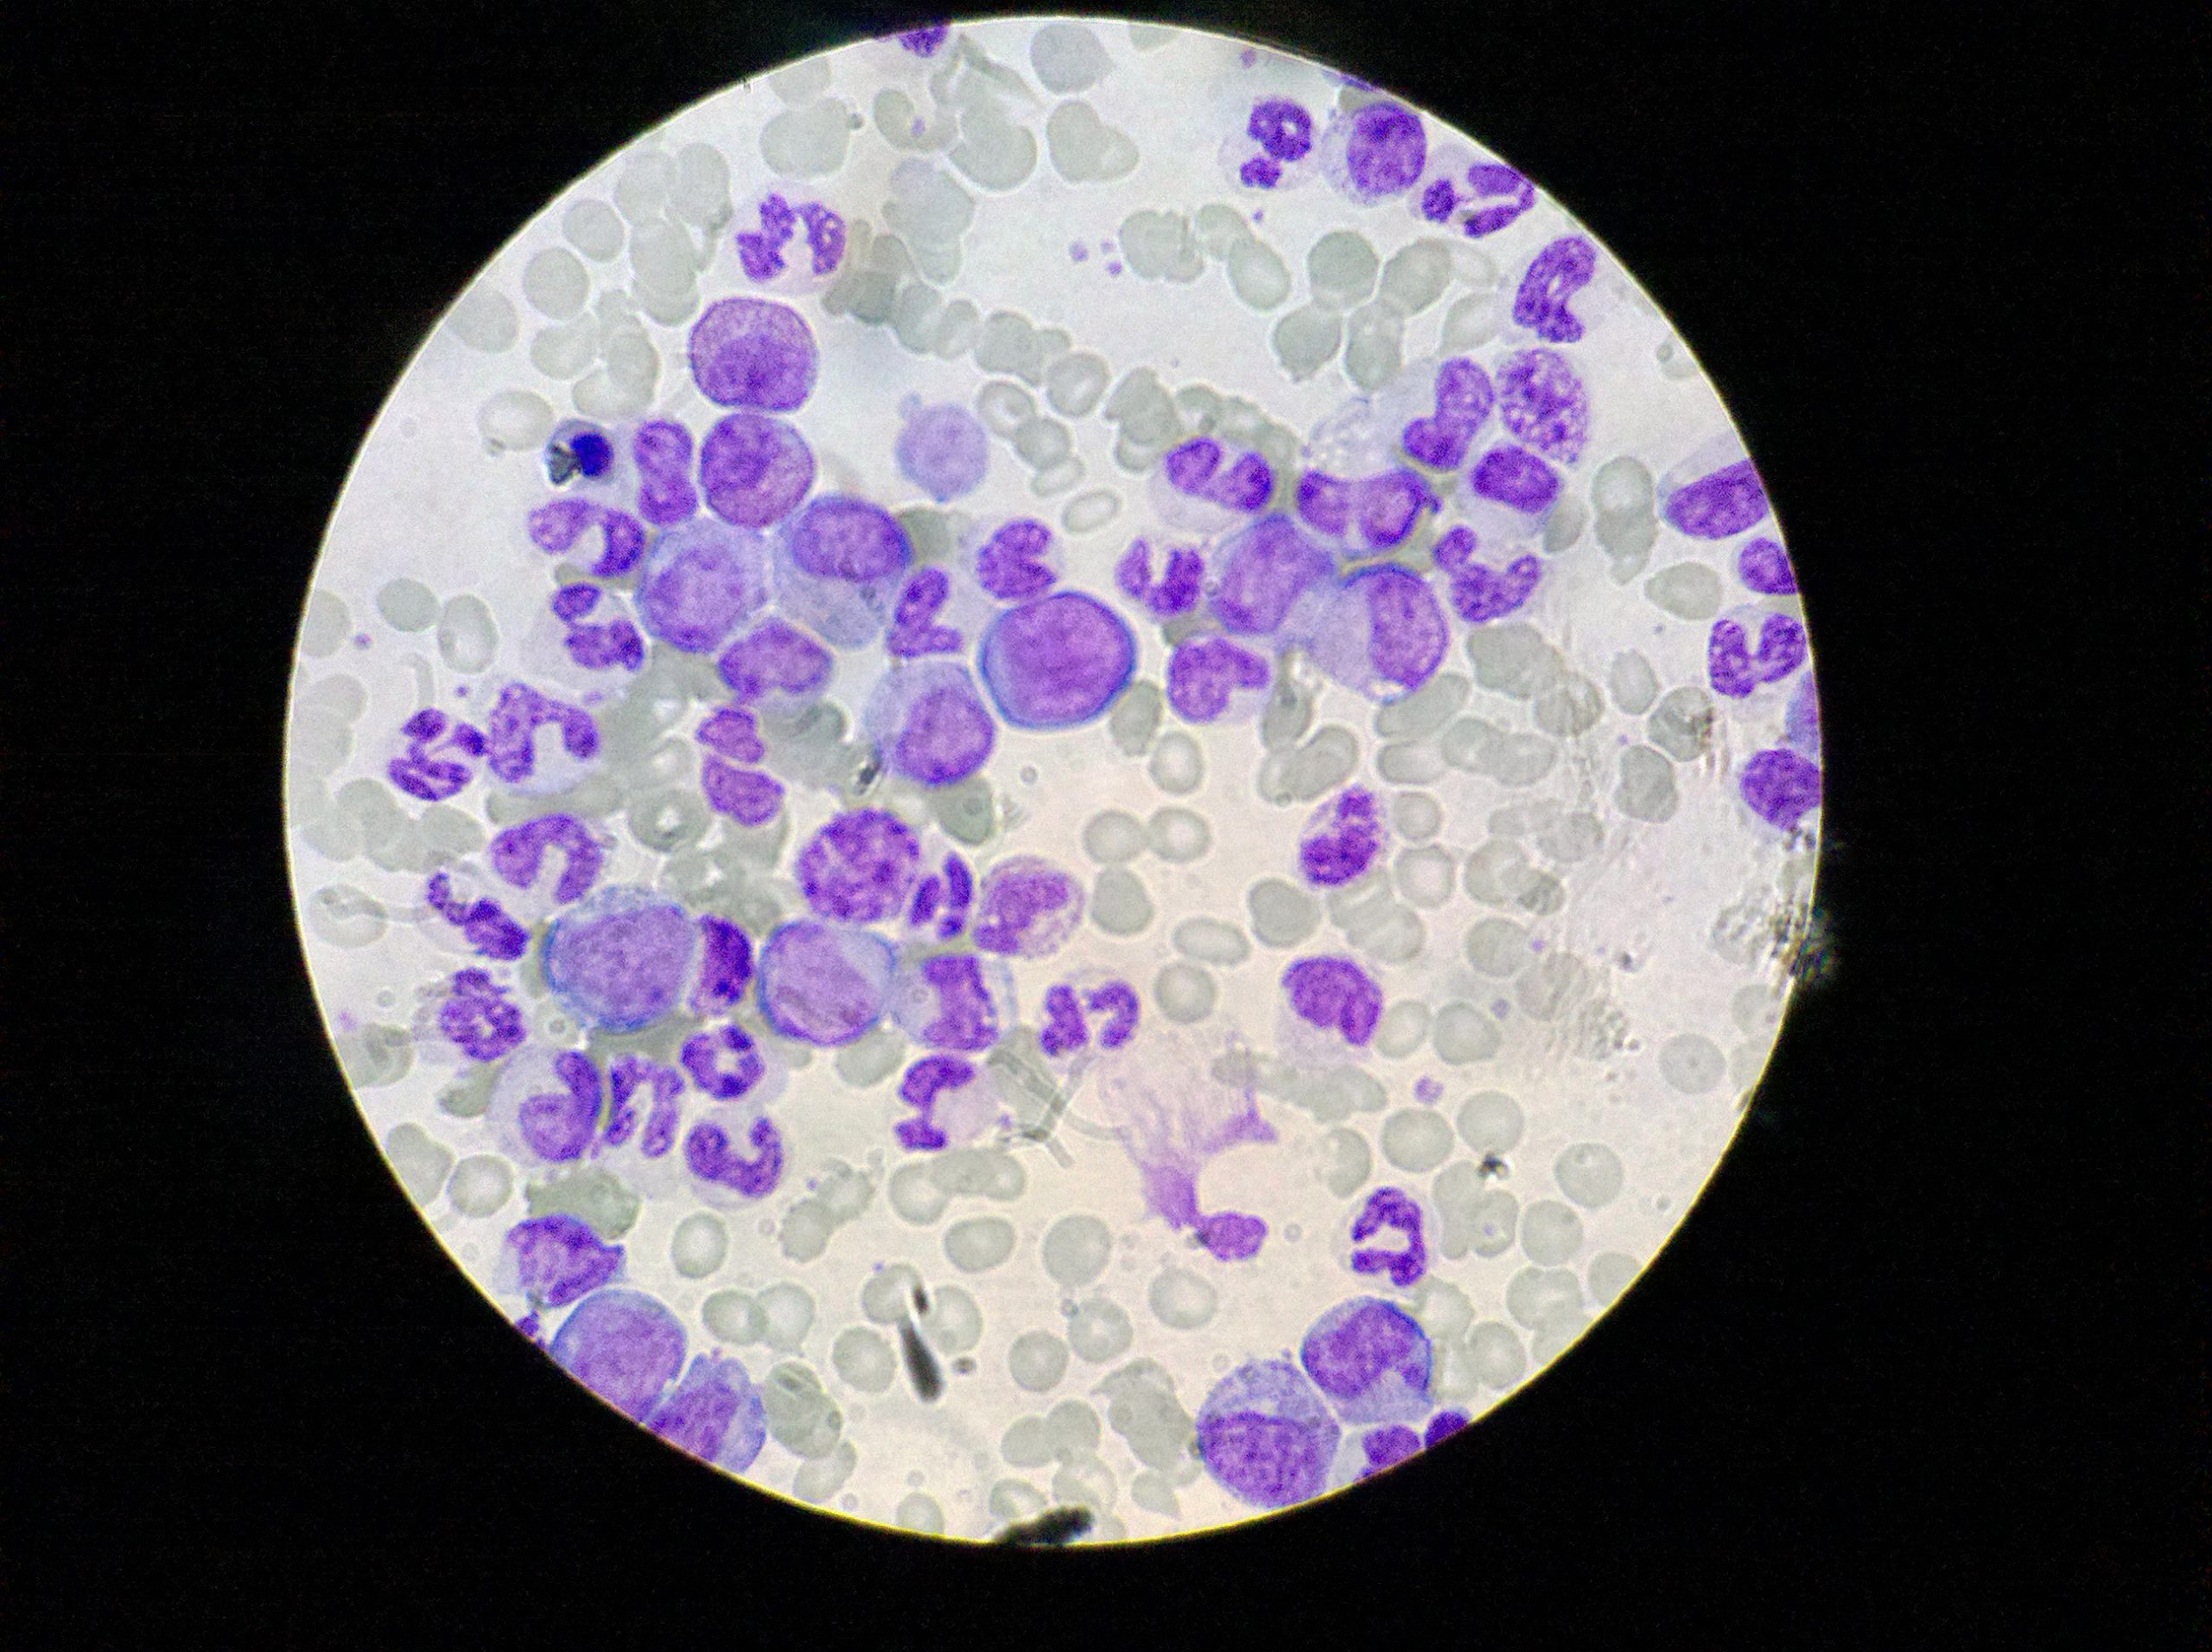 A blood smear showing presence of CML